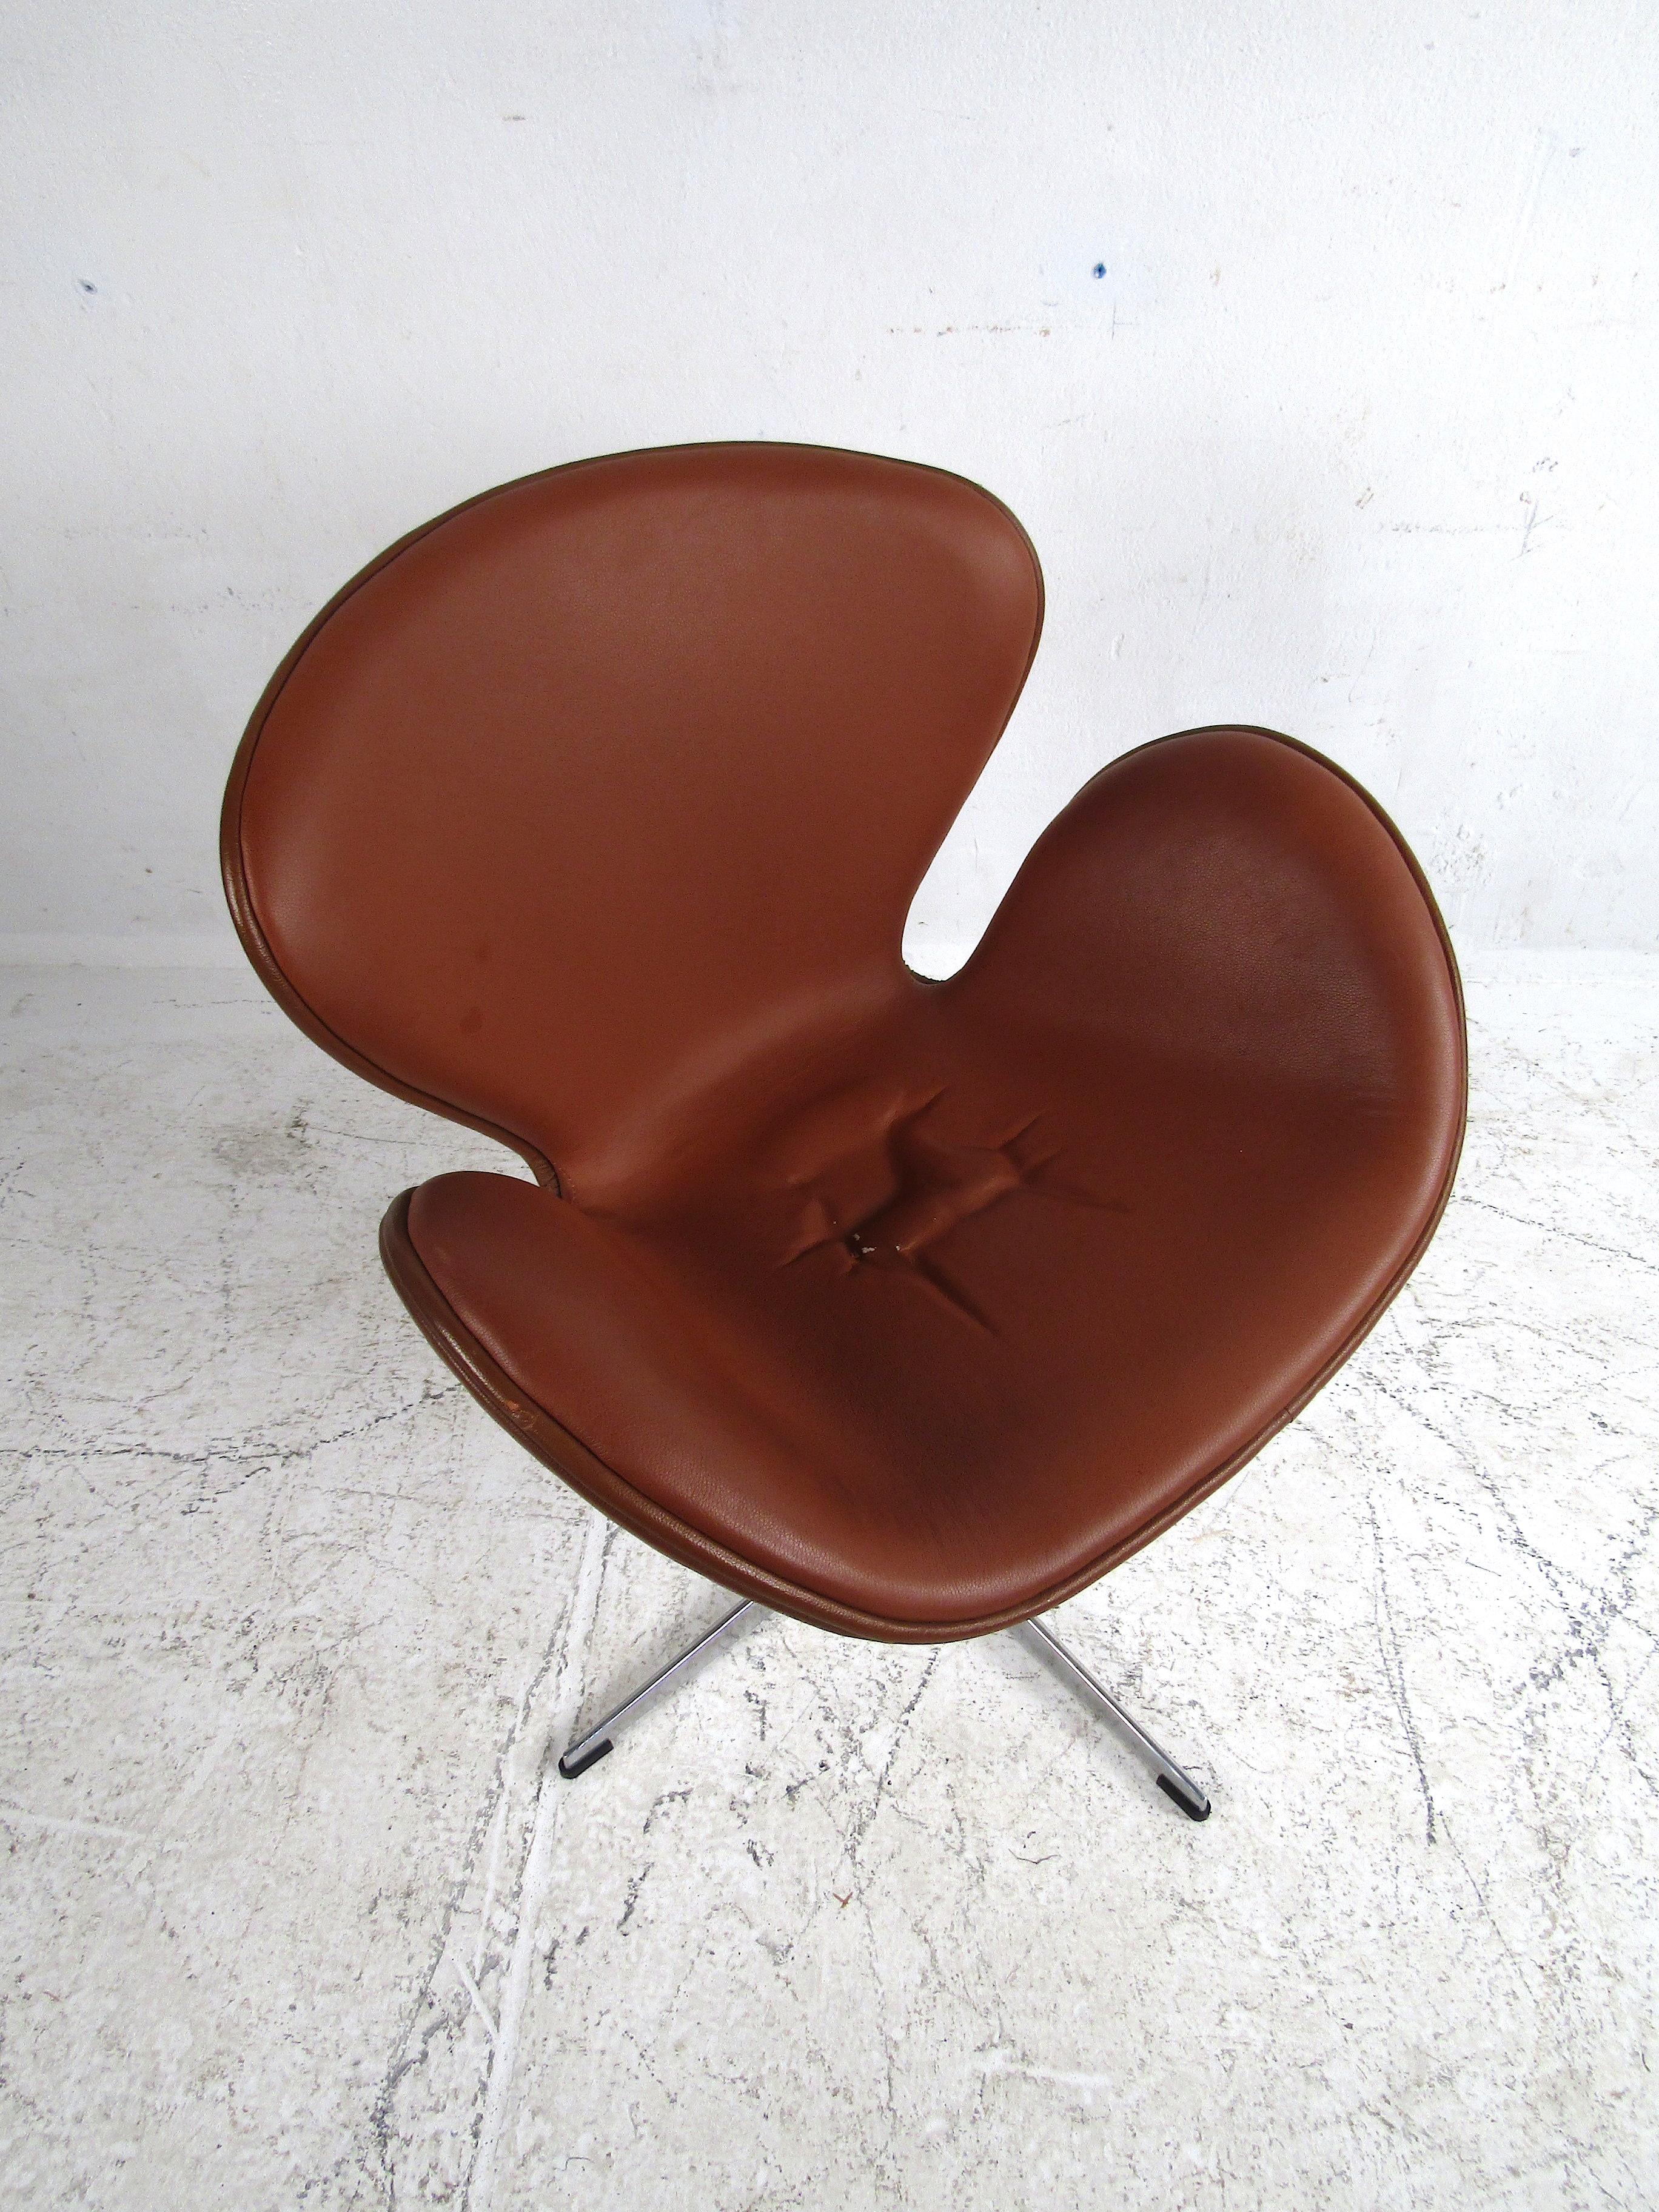 20th Century Midcentury Swiveling Swan Chair after Arne Jacobsen For Sale